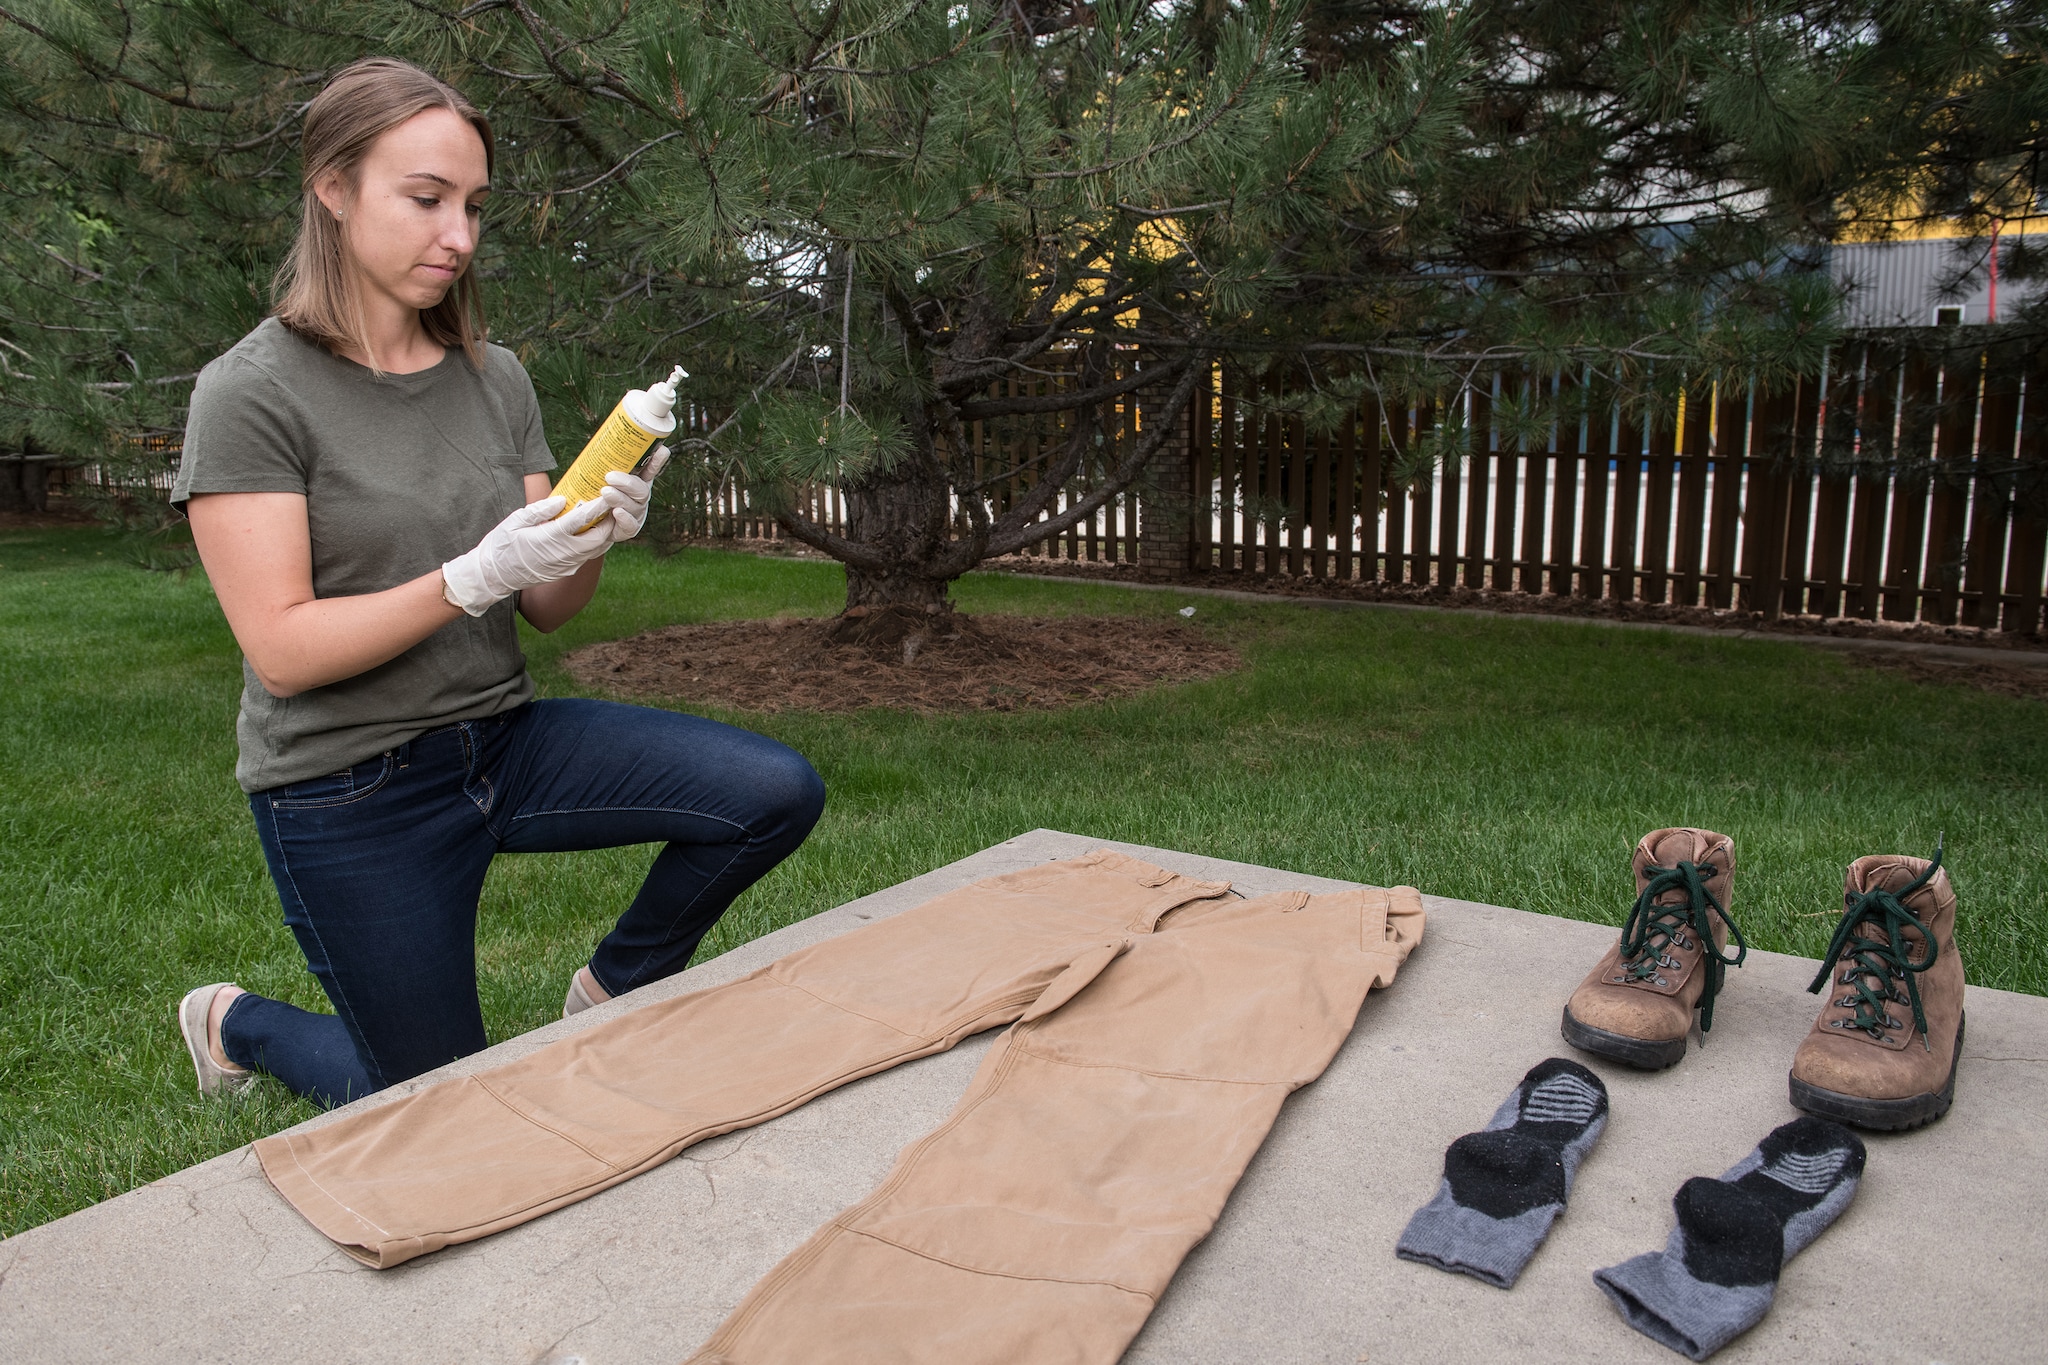 Photo of a woman reading the instructions on a permethrin bottle in order to correctly apply it to her clothing.